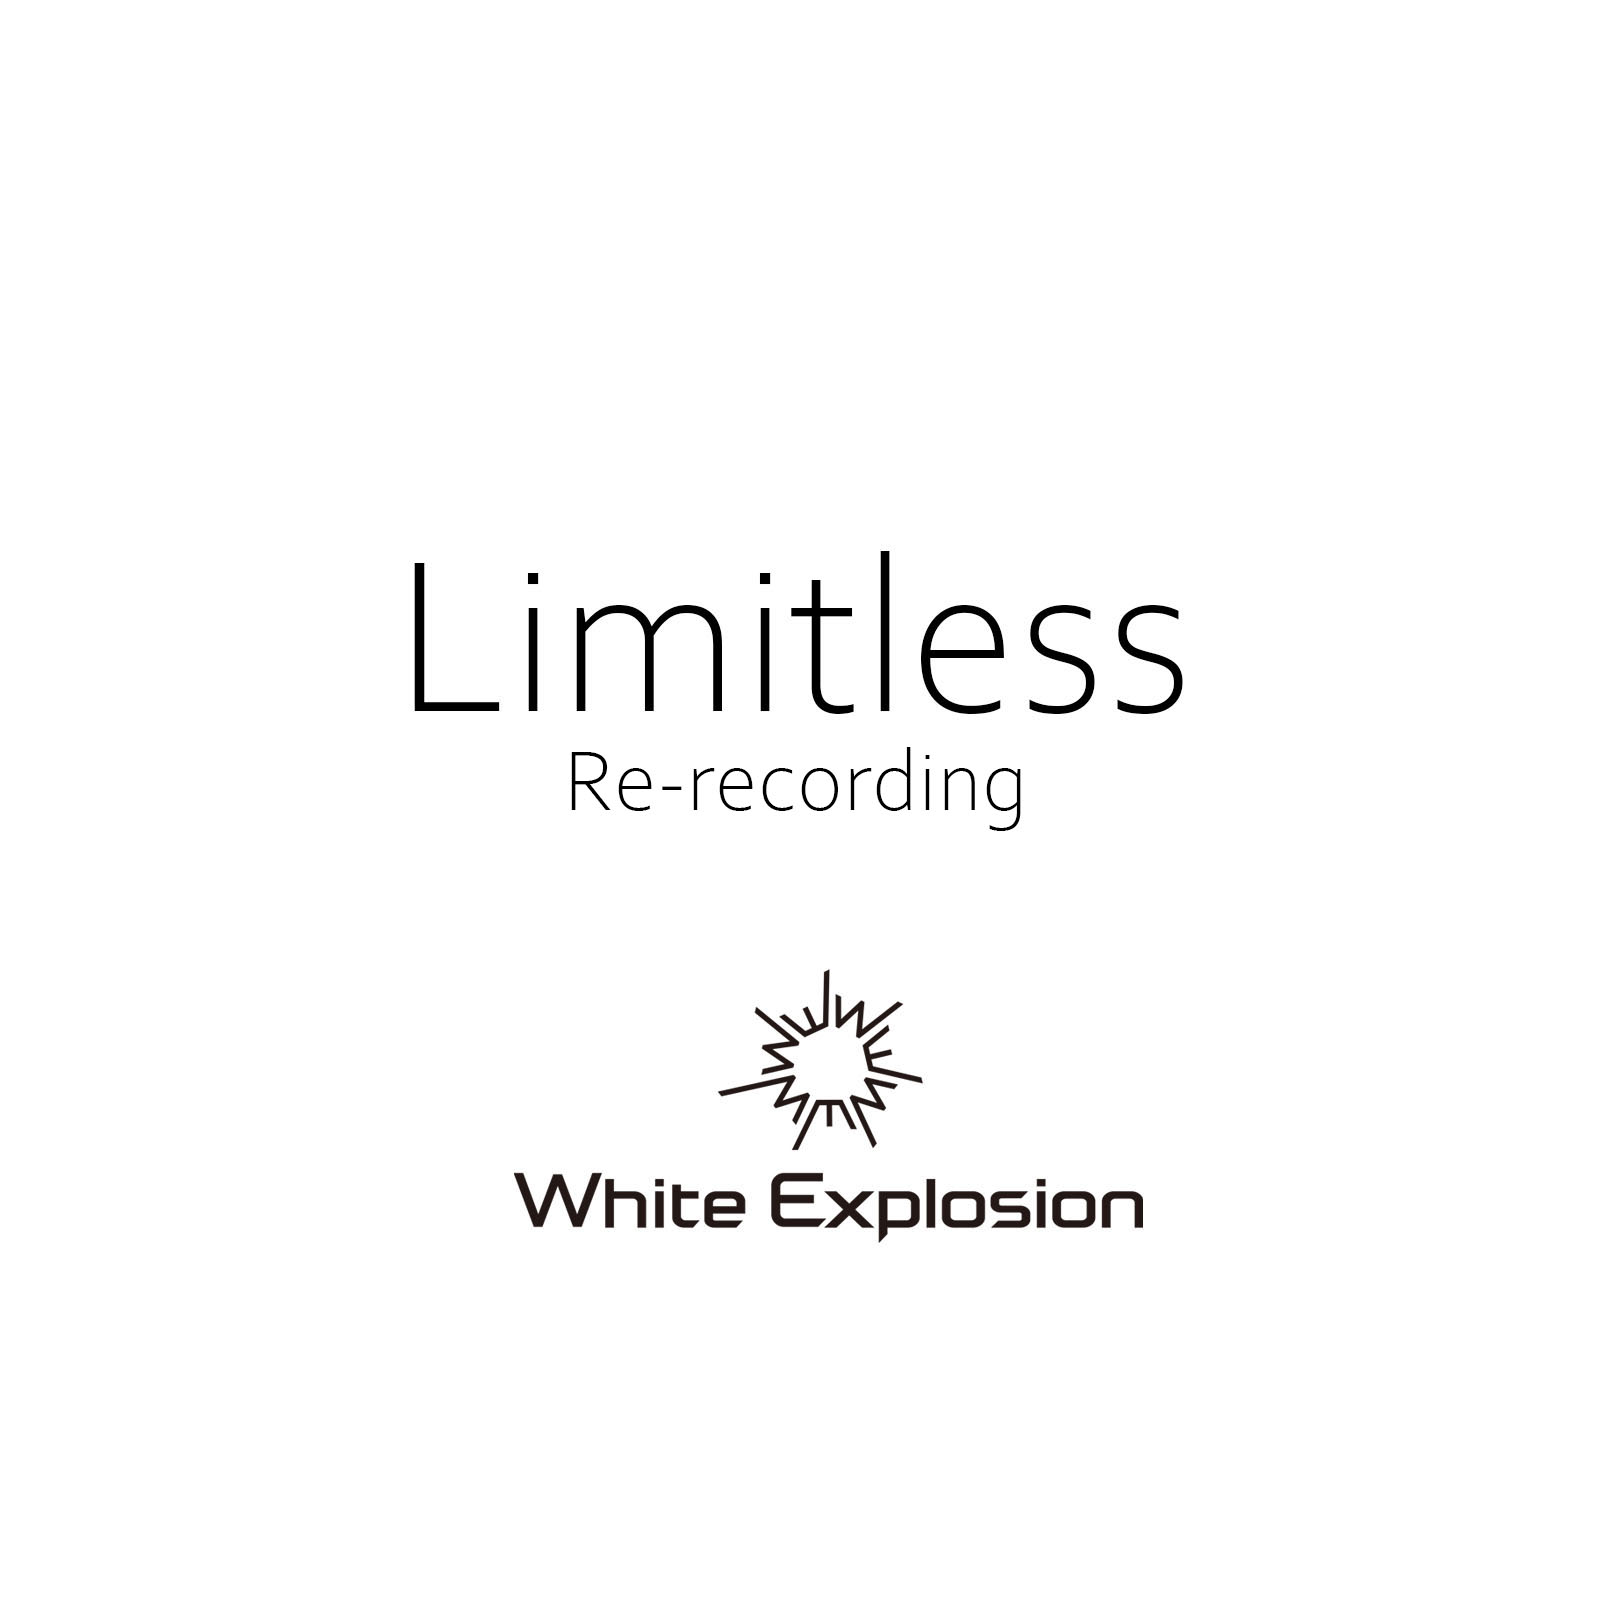 Limitless-Re recording-